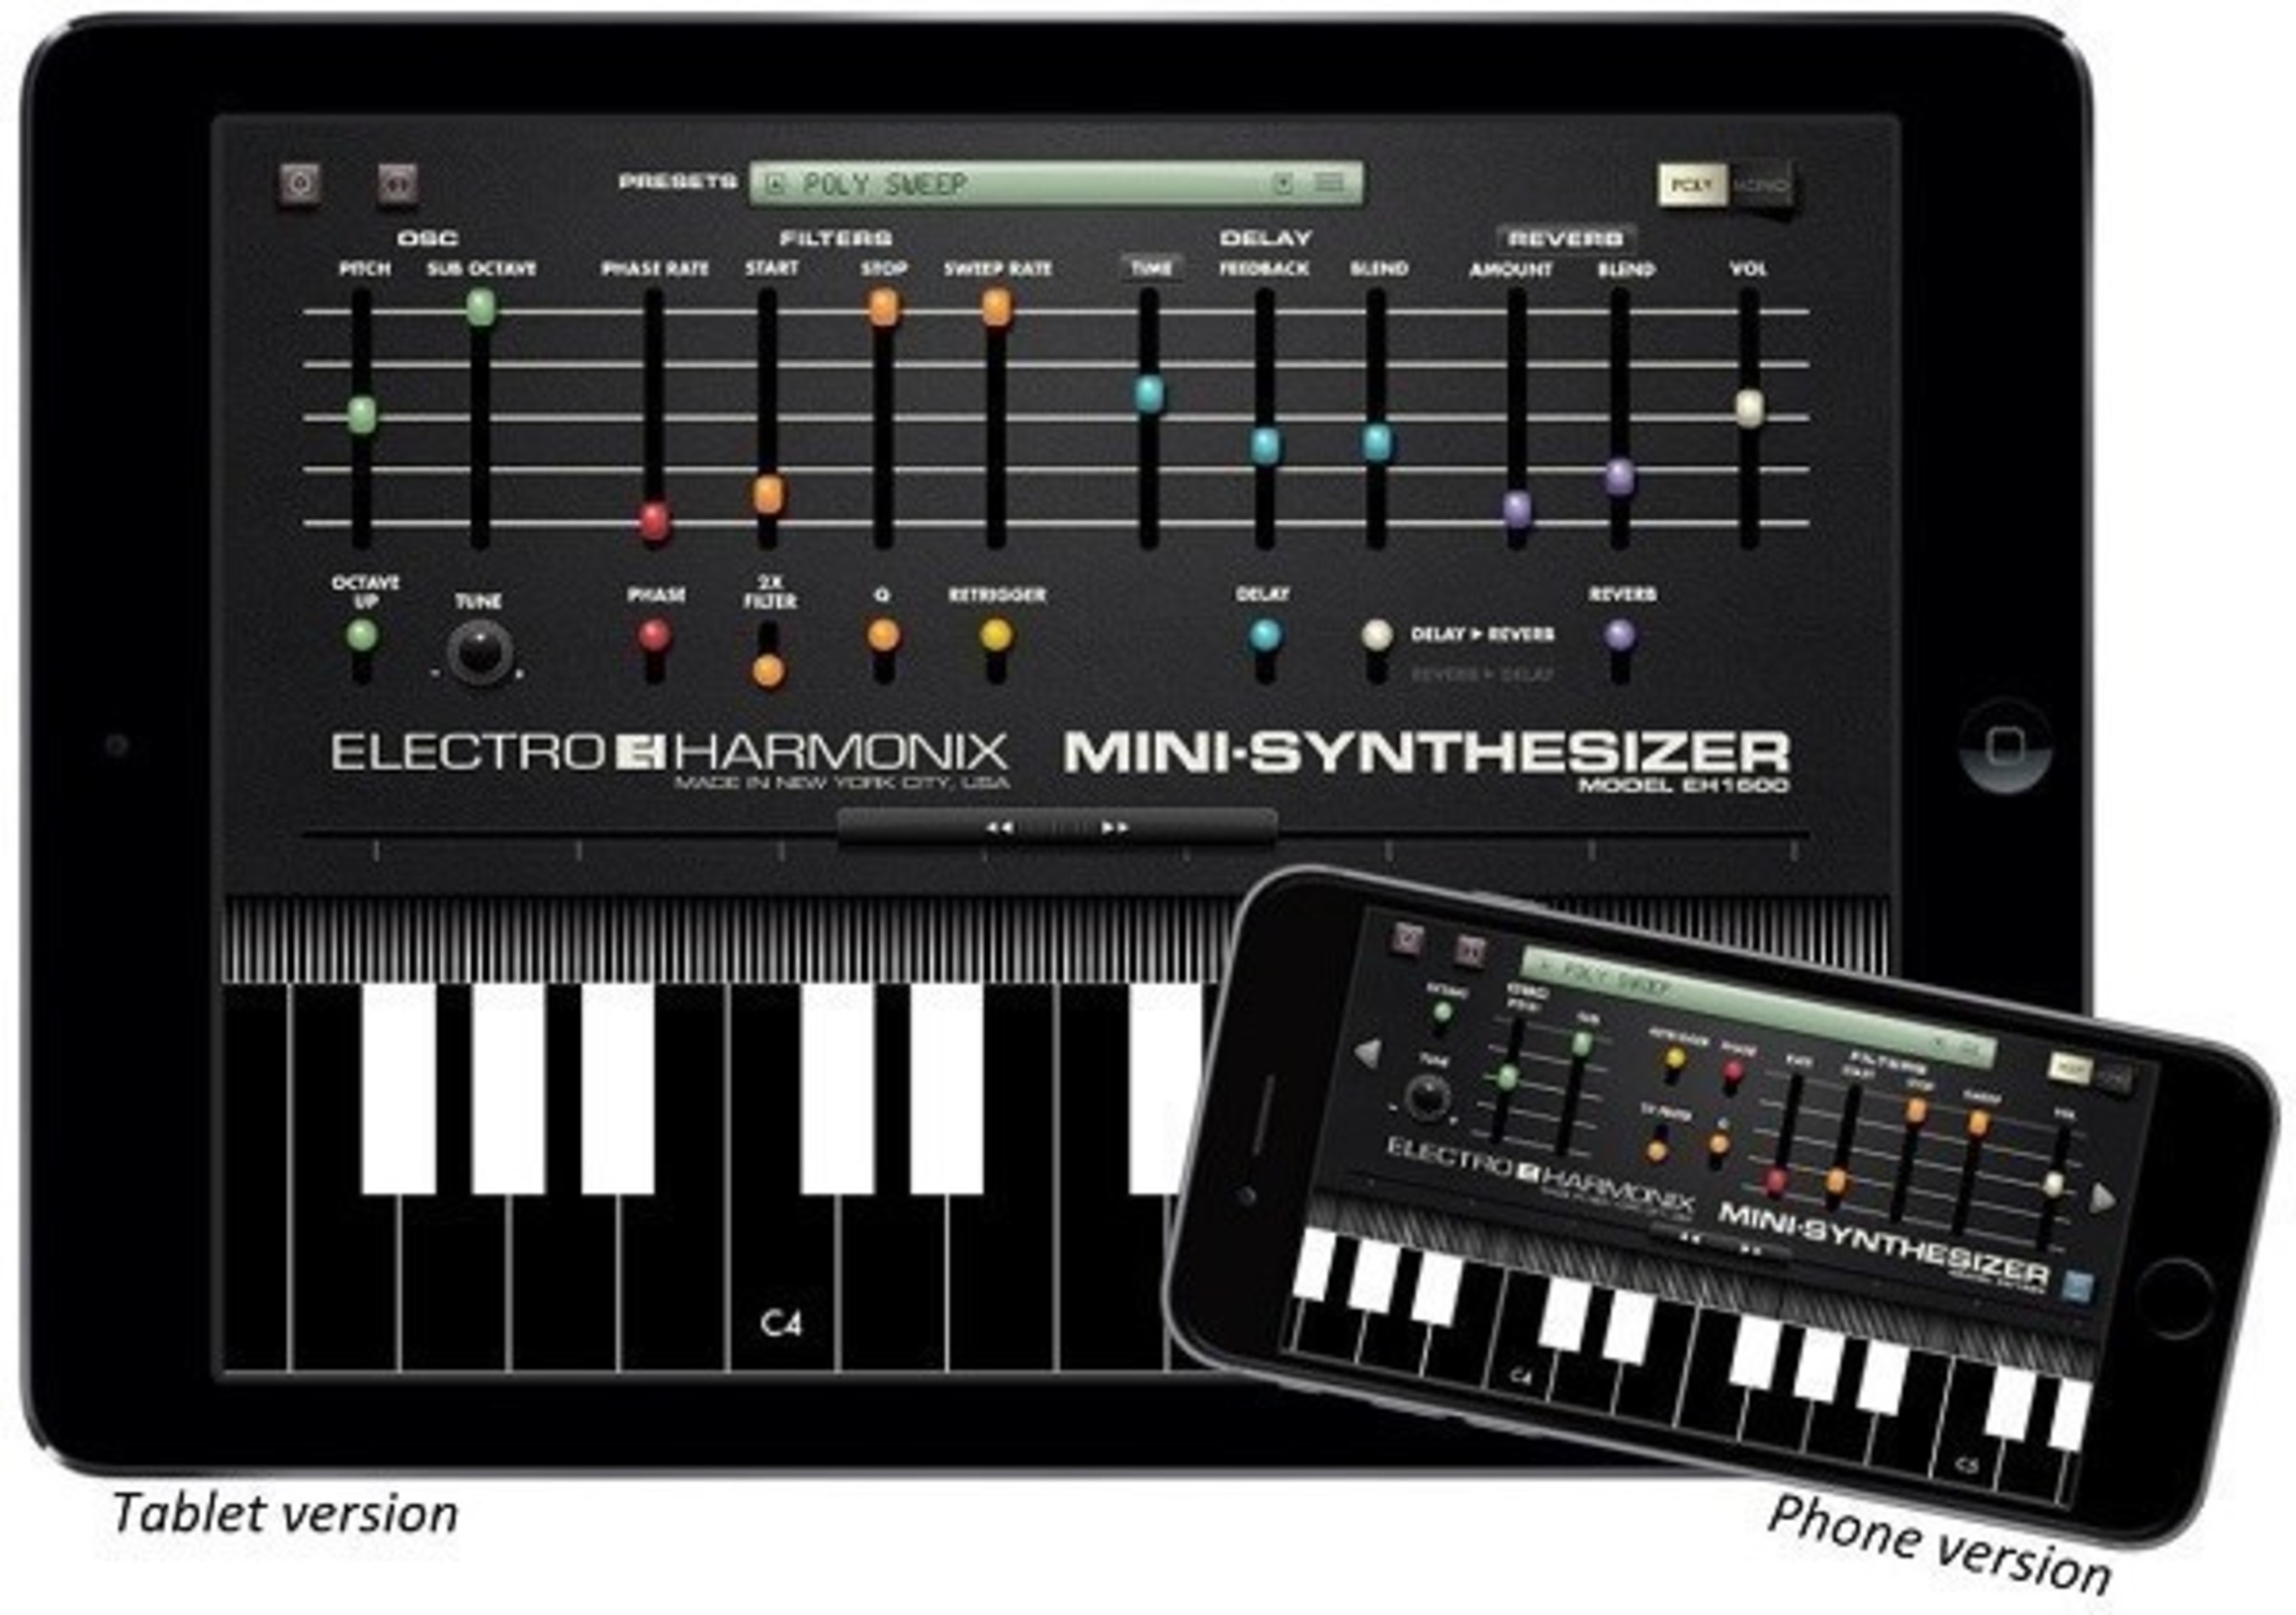 Electro-Harmonix Mini-Synthesizer App shown in iPad and iPhone versions